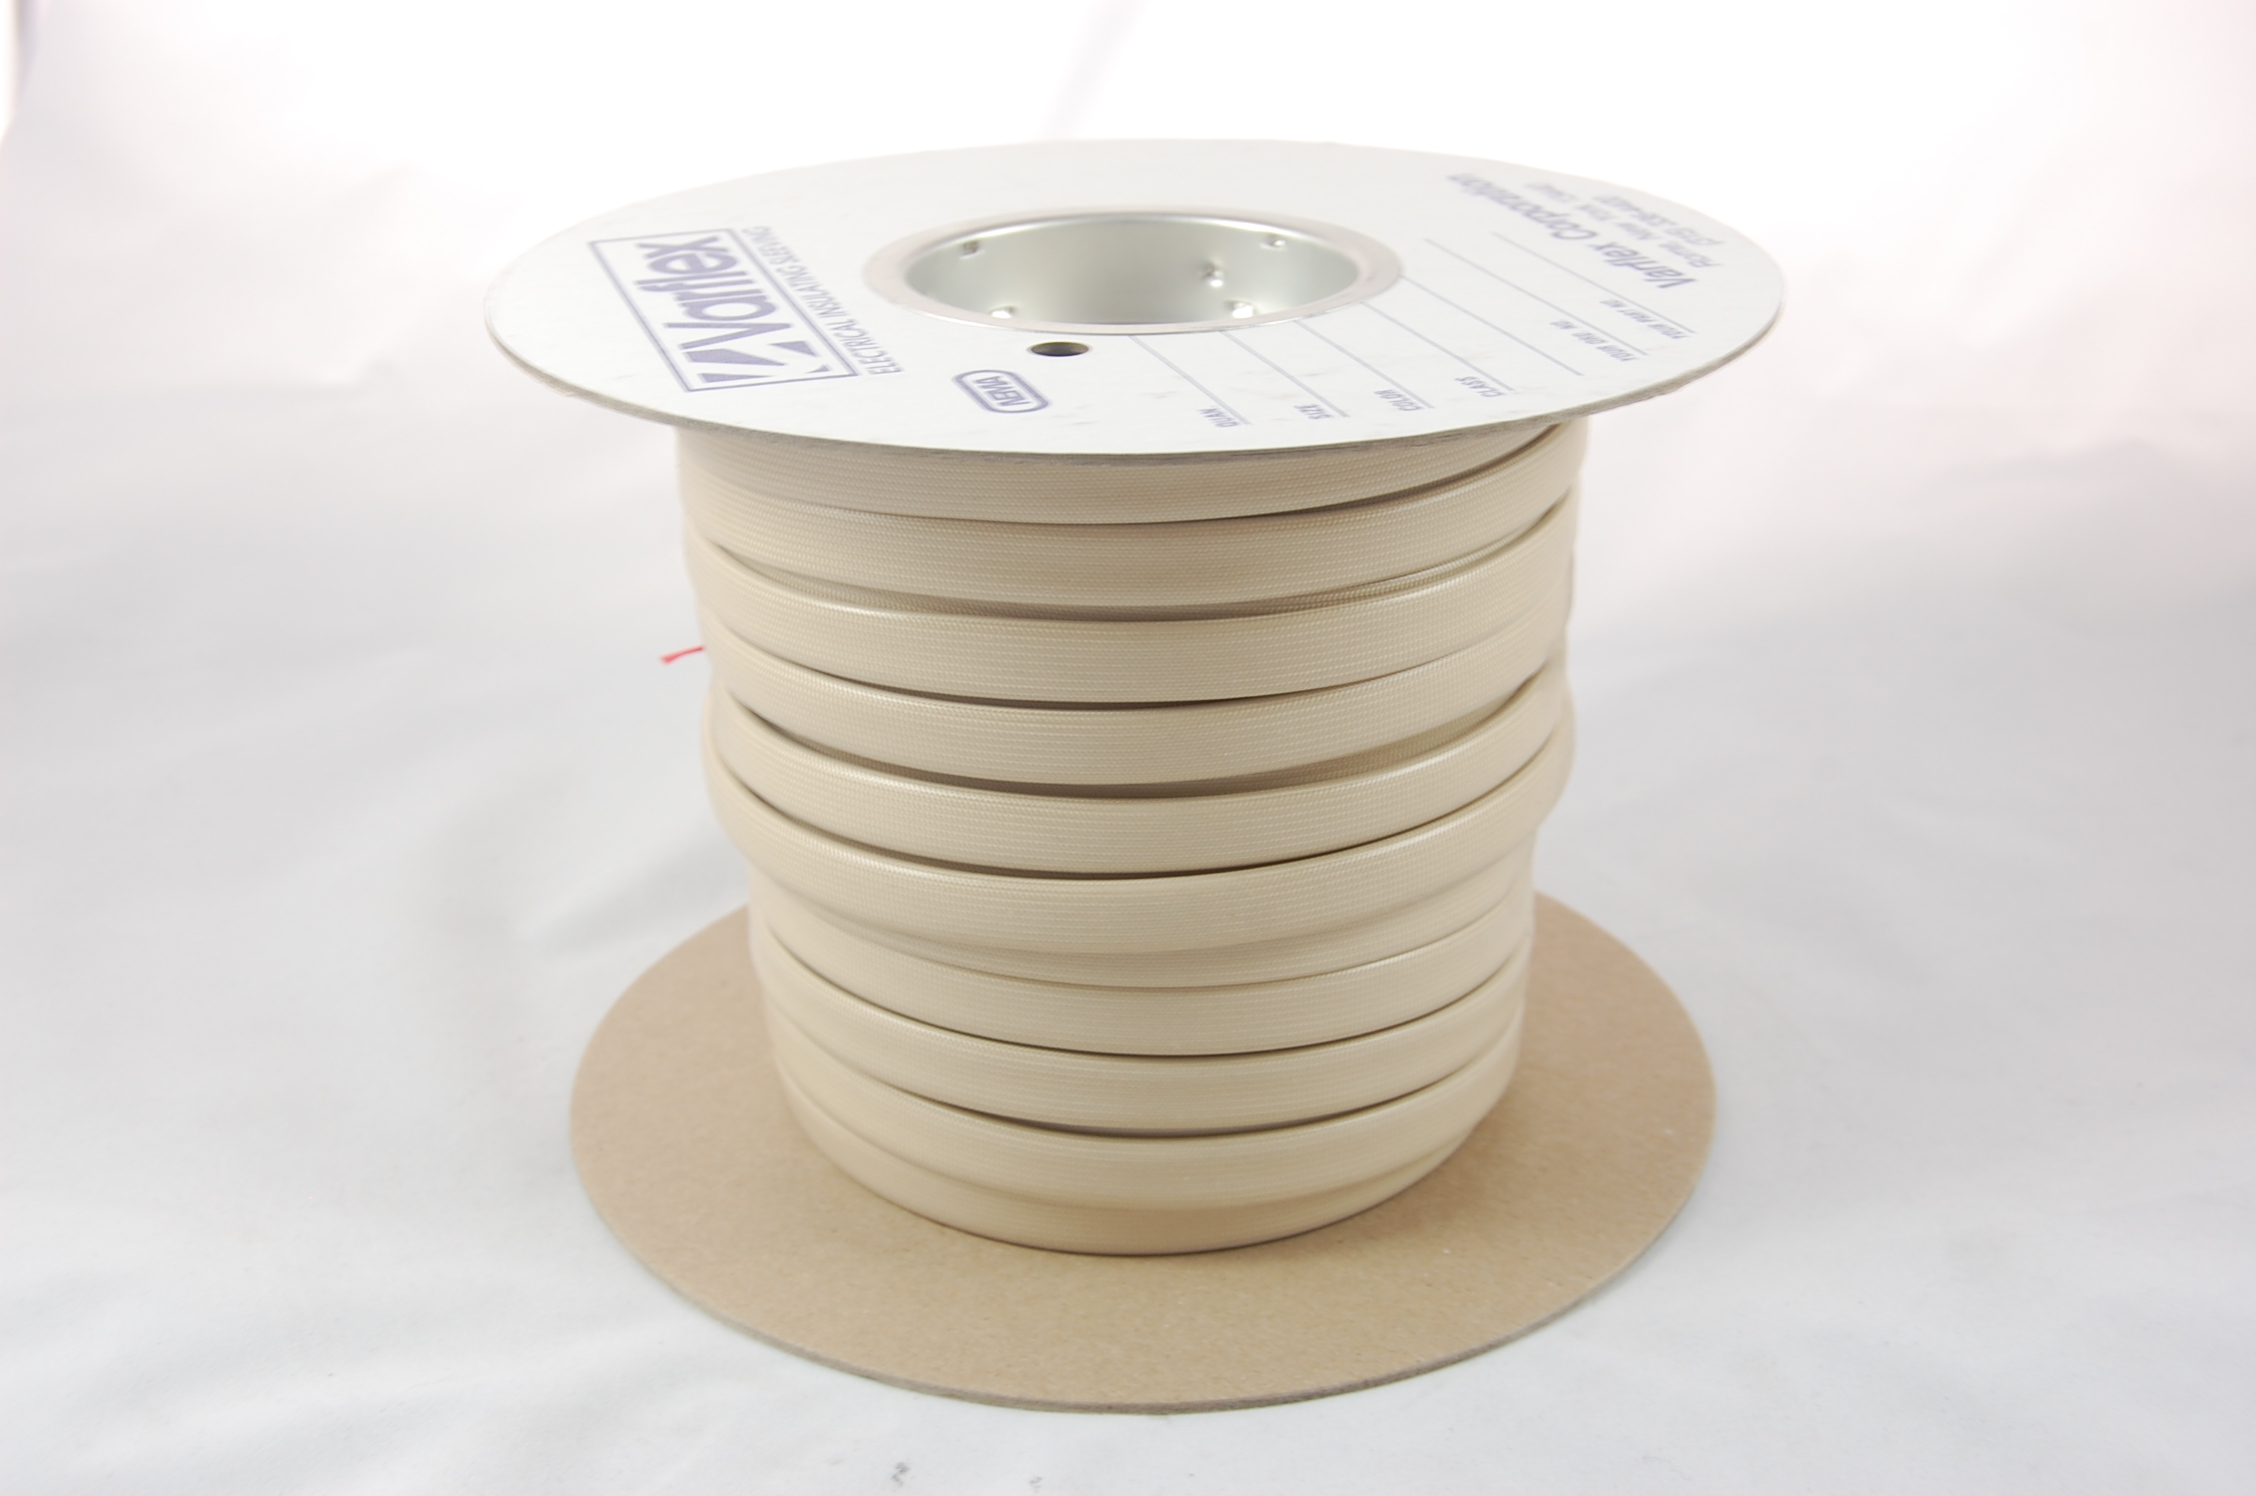 #10 AWG Varglas Silicone Rubber Grade H-A-1 (8000V) High Temperature Silicone Rubber Coated Braided Fiberglass Sleeving 200°C, natural, 150 FT per spool